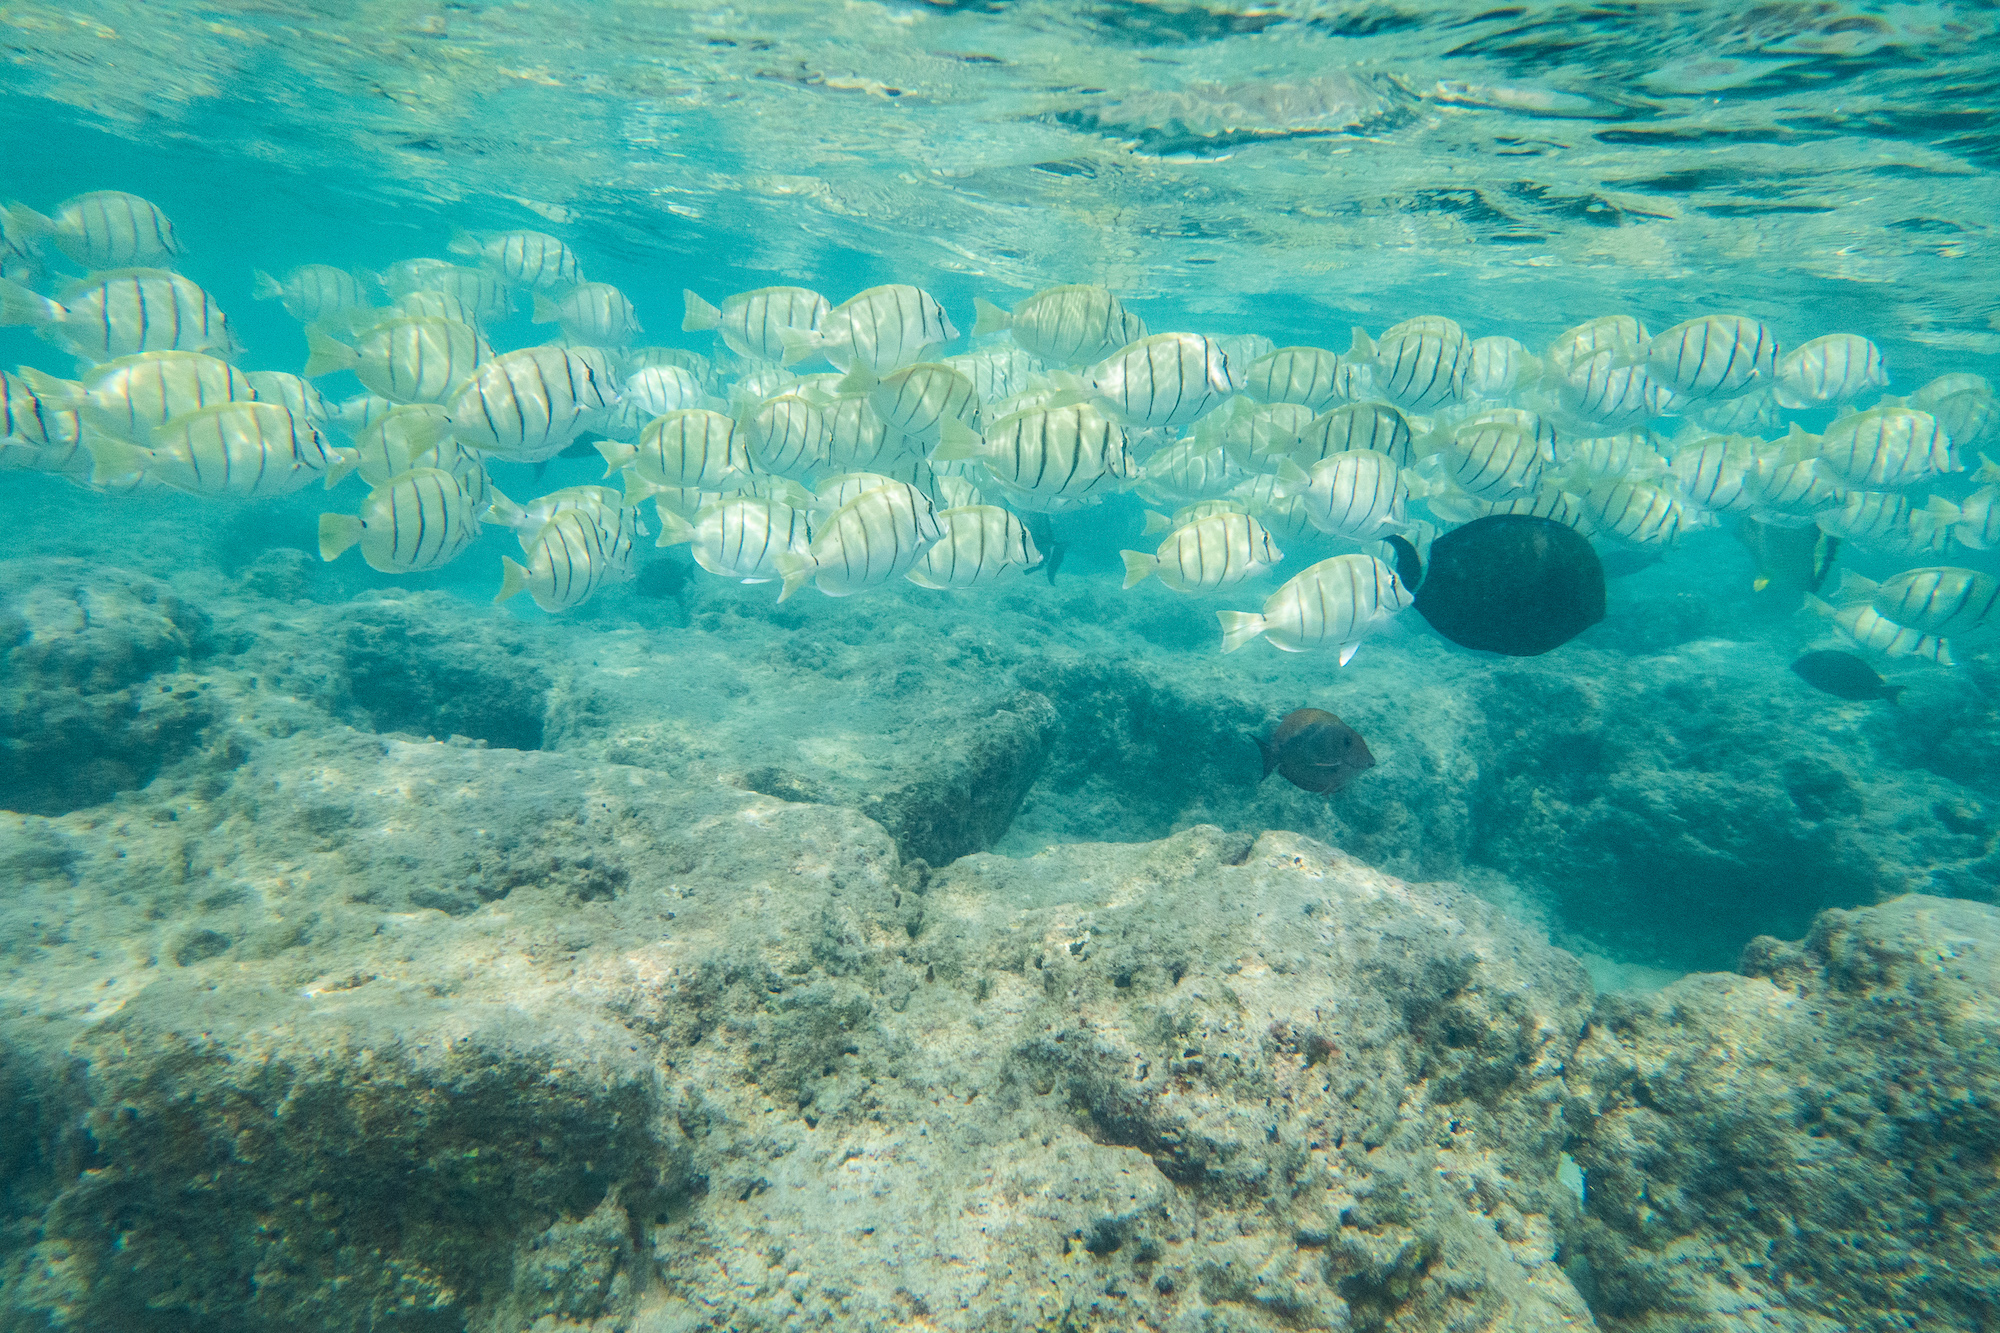 A large school of surgeonfishes swims over a shallow Hawaiian reef.